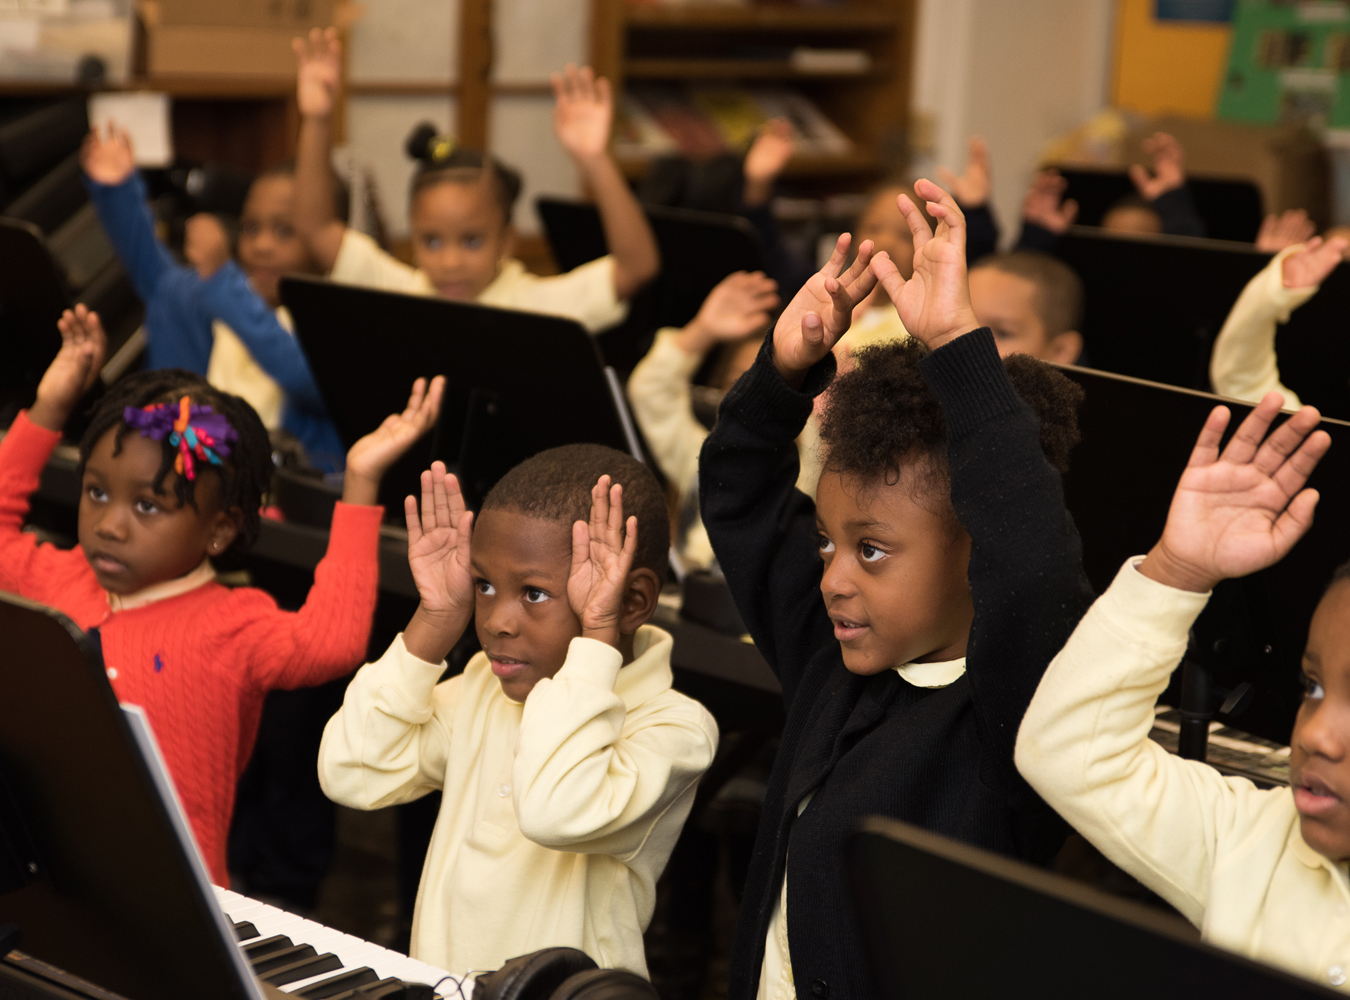 Young children stand at their pianos stretching their arms up in the air as they follow their teacher's lead.